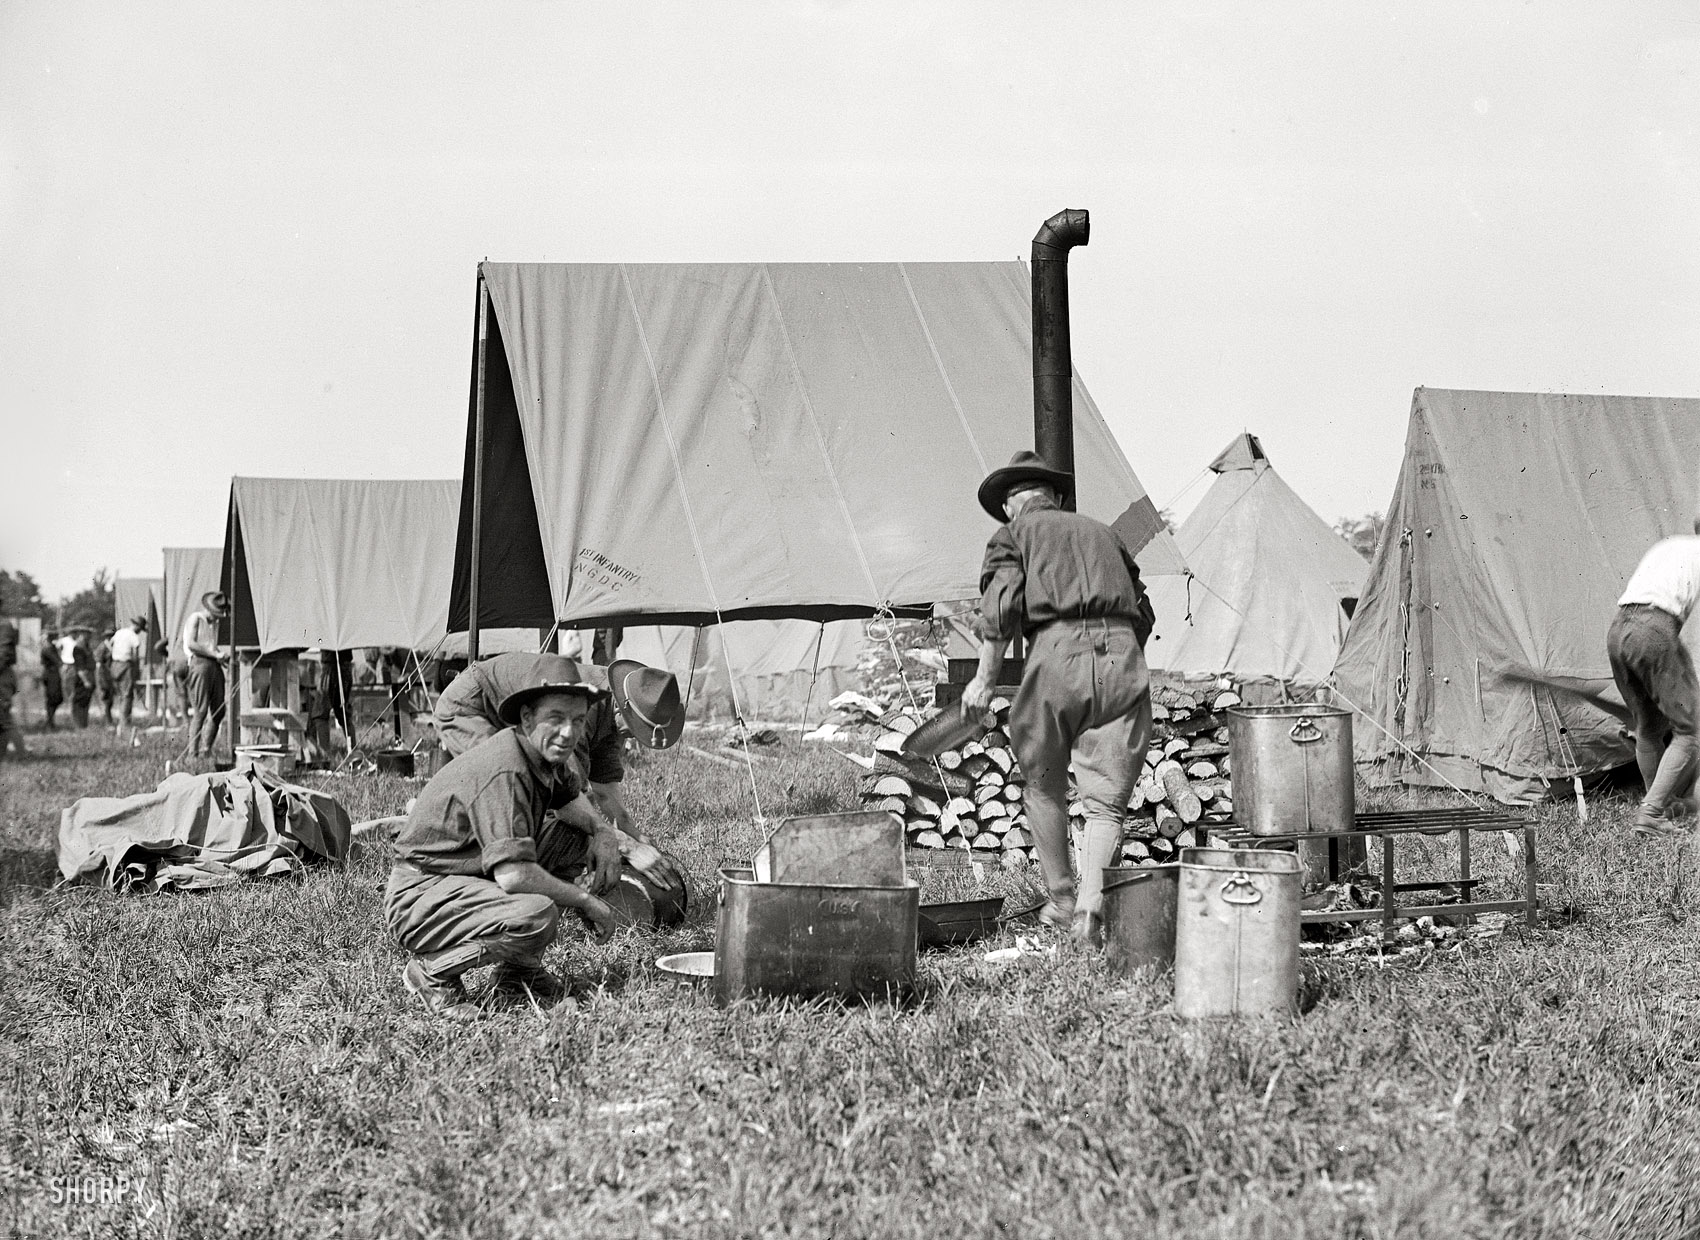 1915. "National Guard of D.C. cooking." Just what is it that makes a fried egg taste so much better out of doors? Harris & Ewing glass negative. View full size.